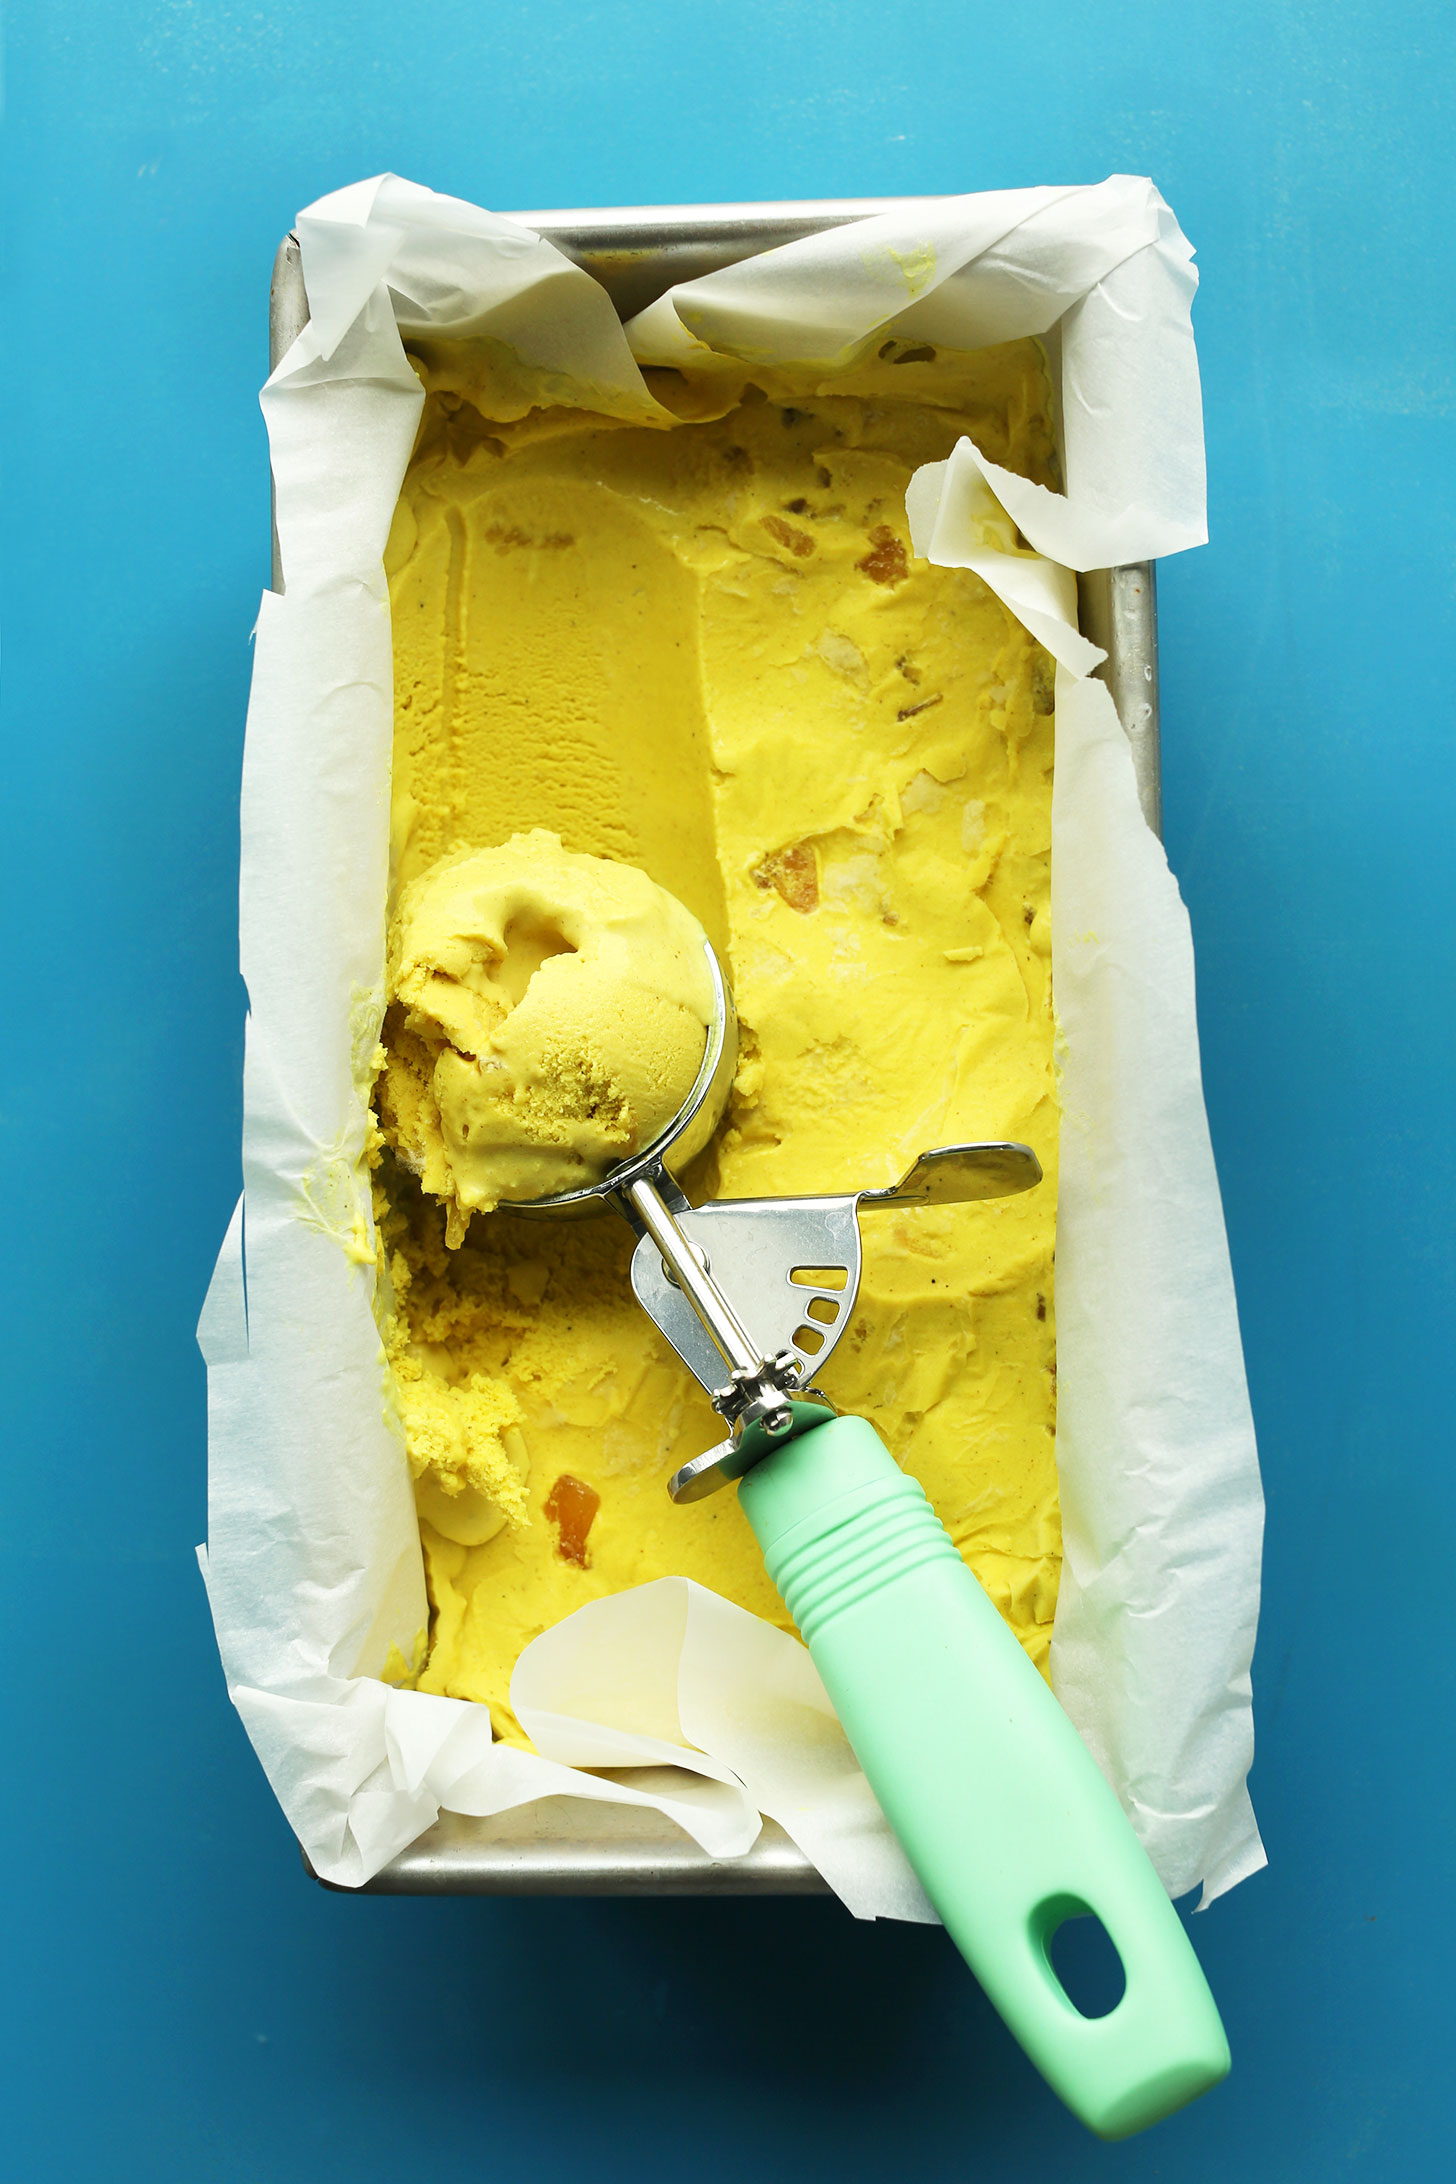 Scooping out gluten-free vegan ice cream made with golden milk